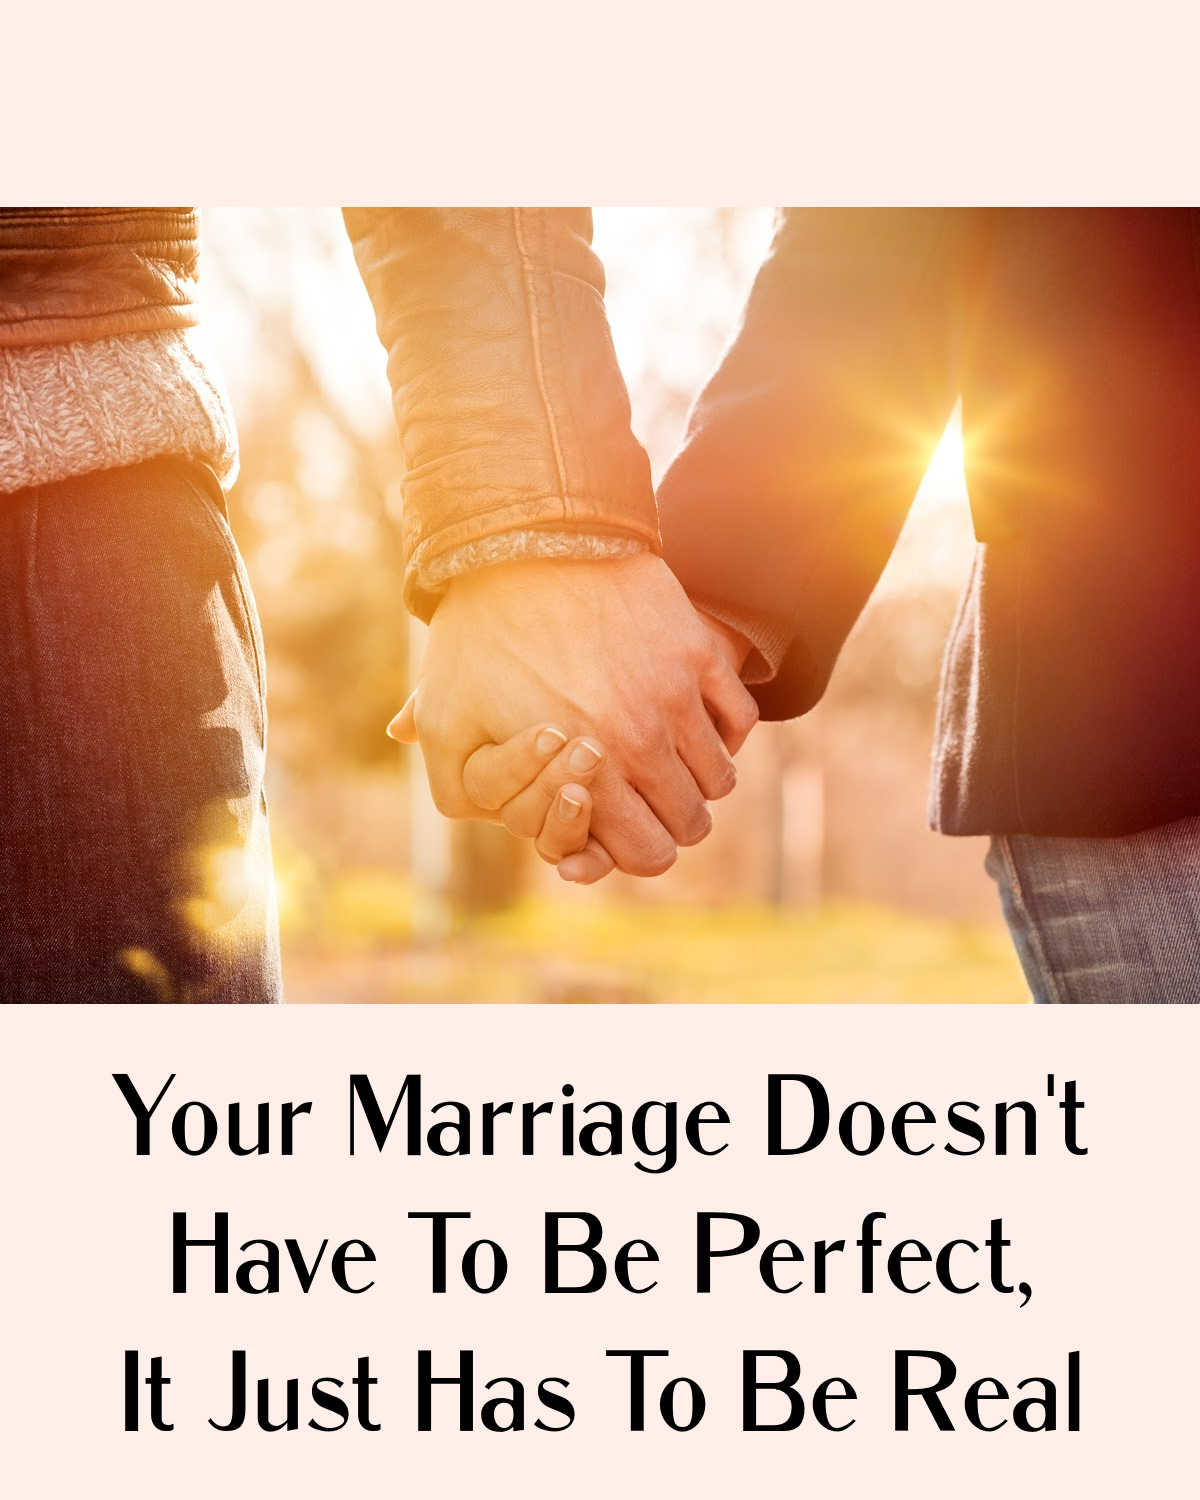 Your Marriage Doesn't Have To Be Perfect, It Just Has To Be Real